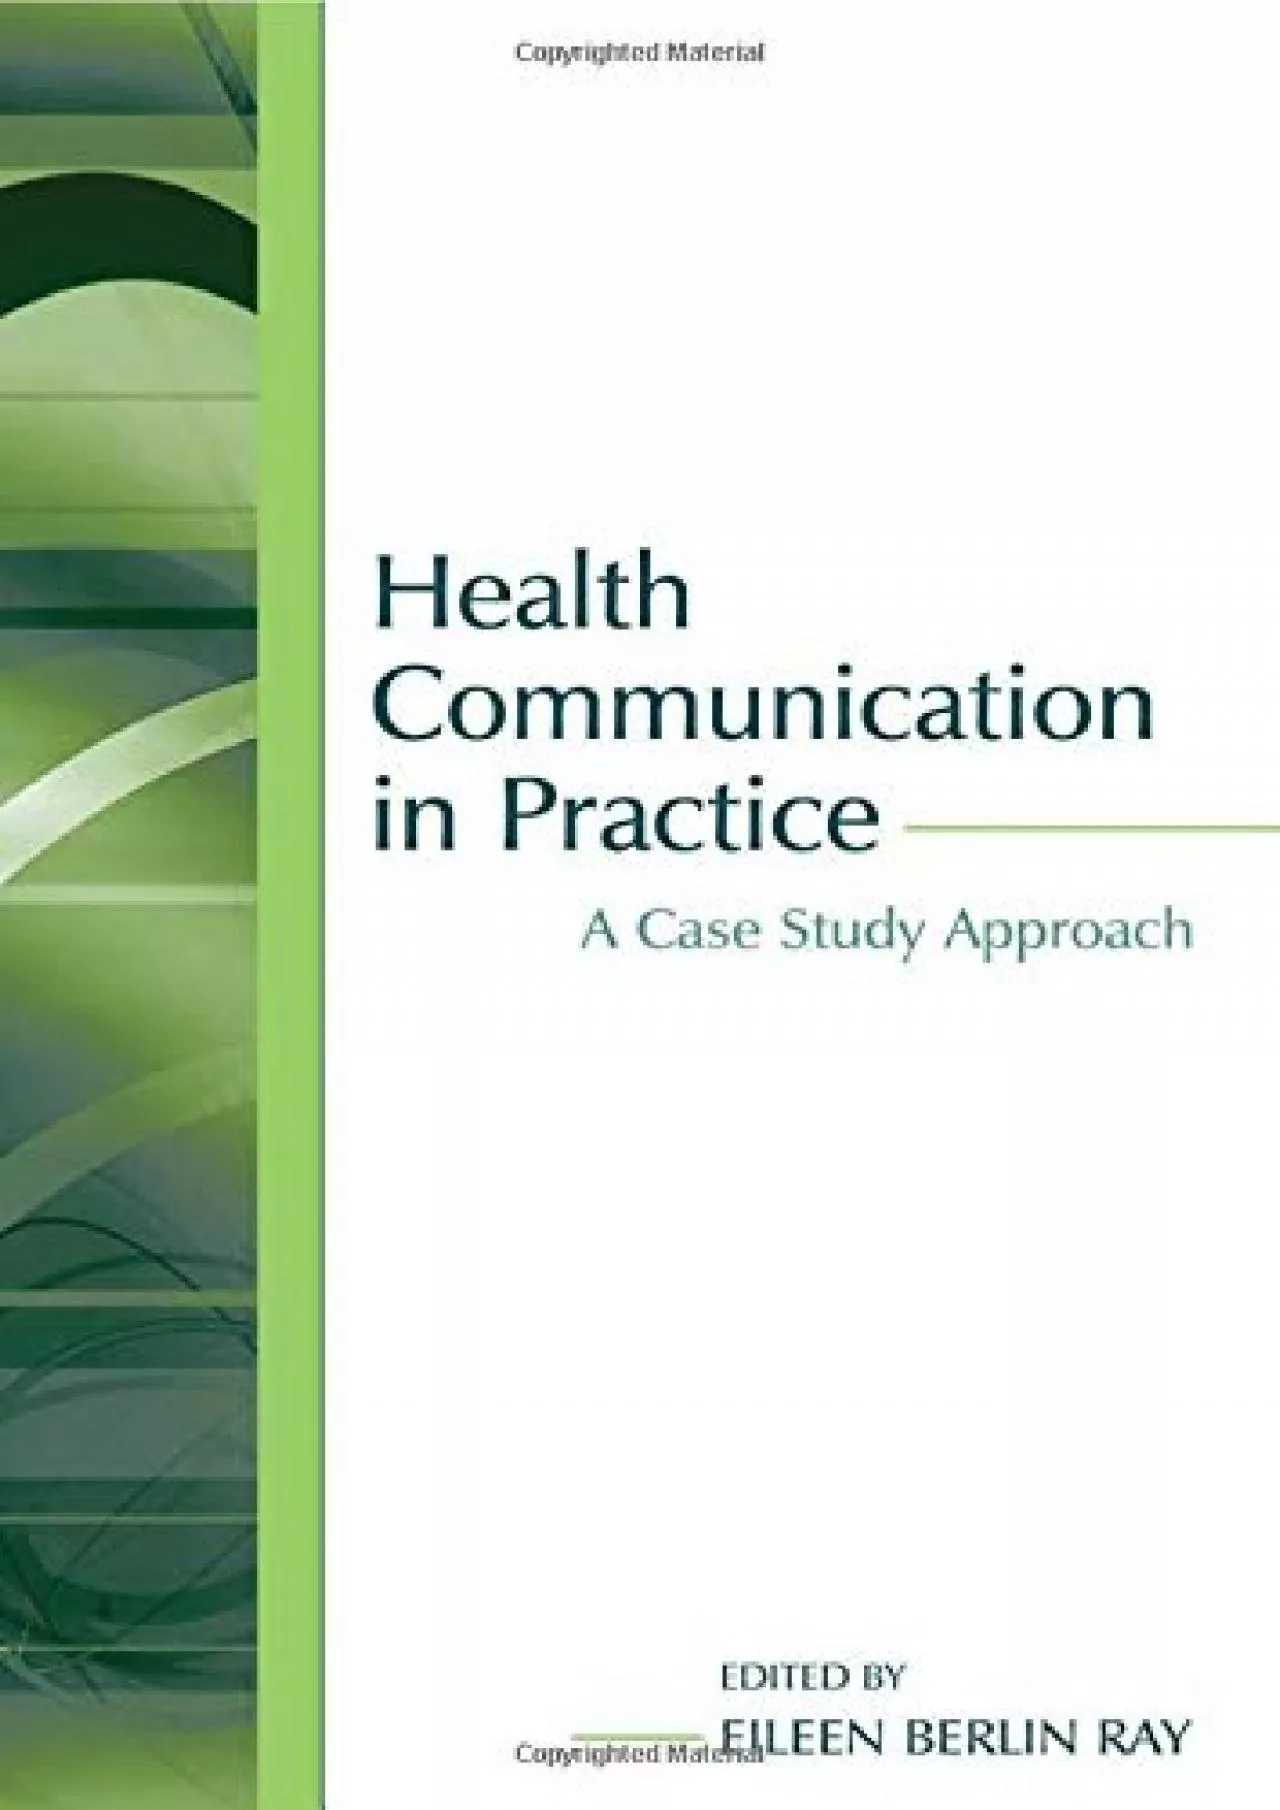 (DOWNLOAD)-Health Communication in Practice: A Case Study Approach (Routledge Communication